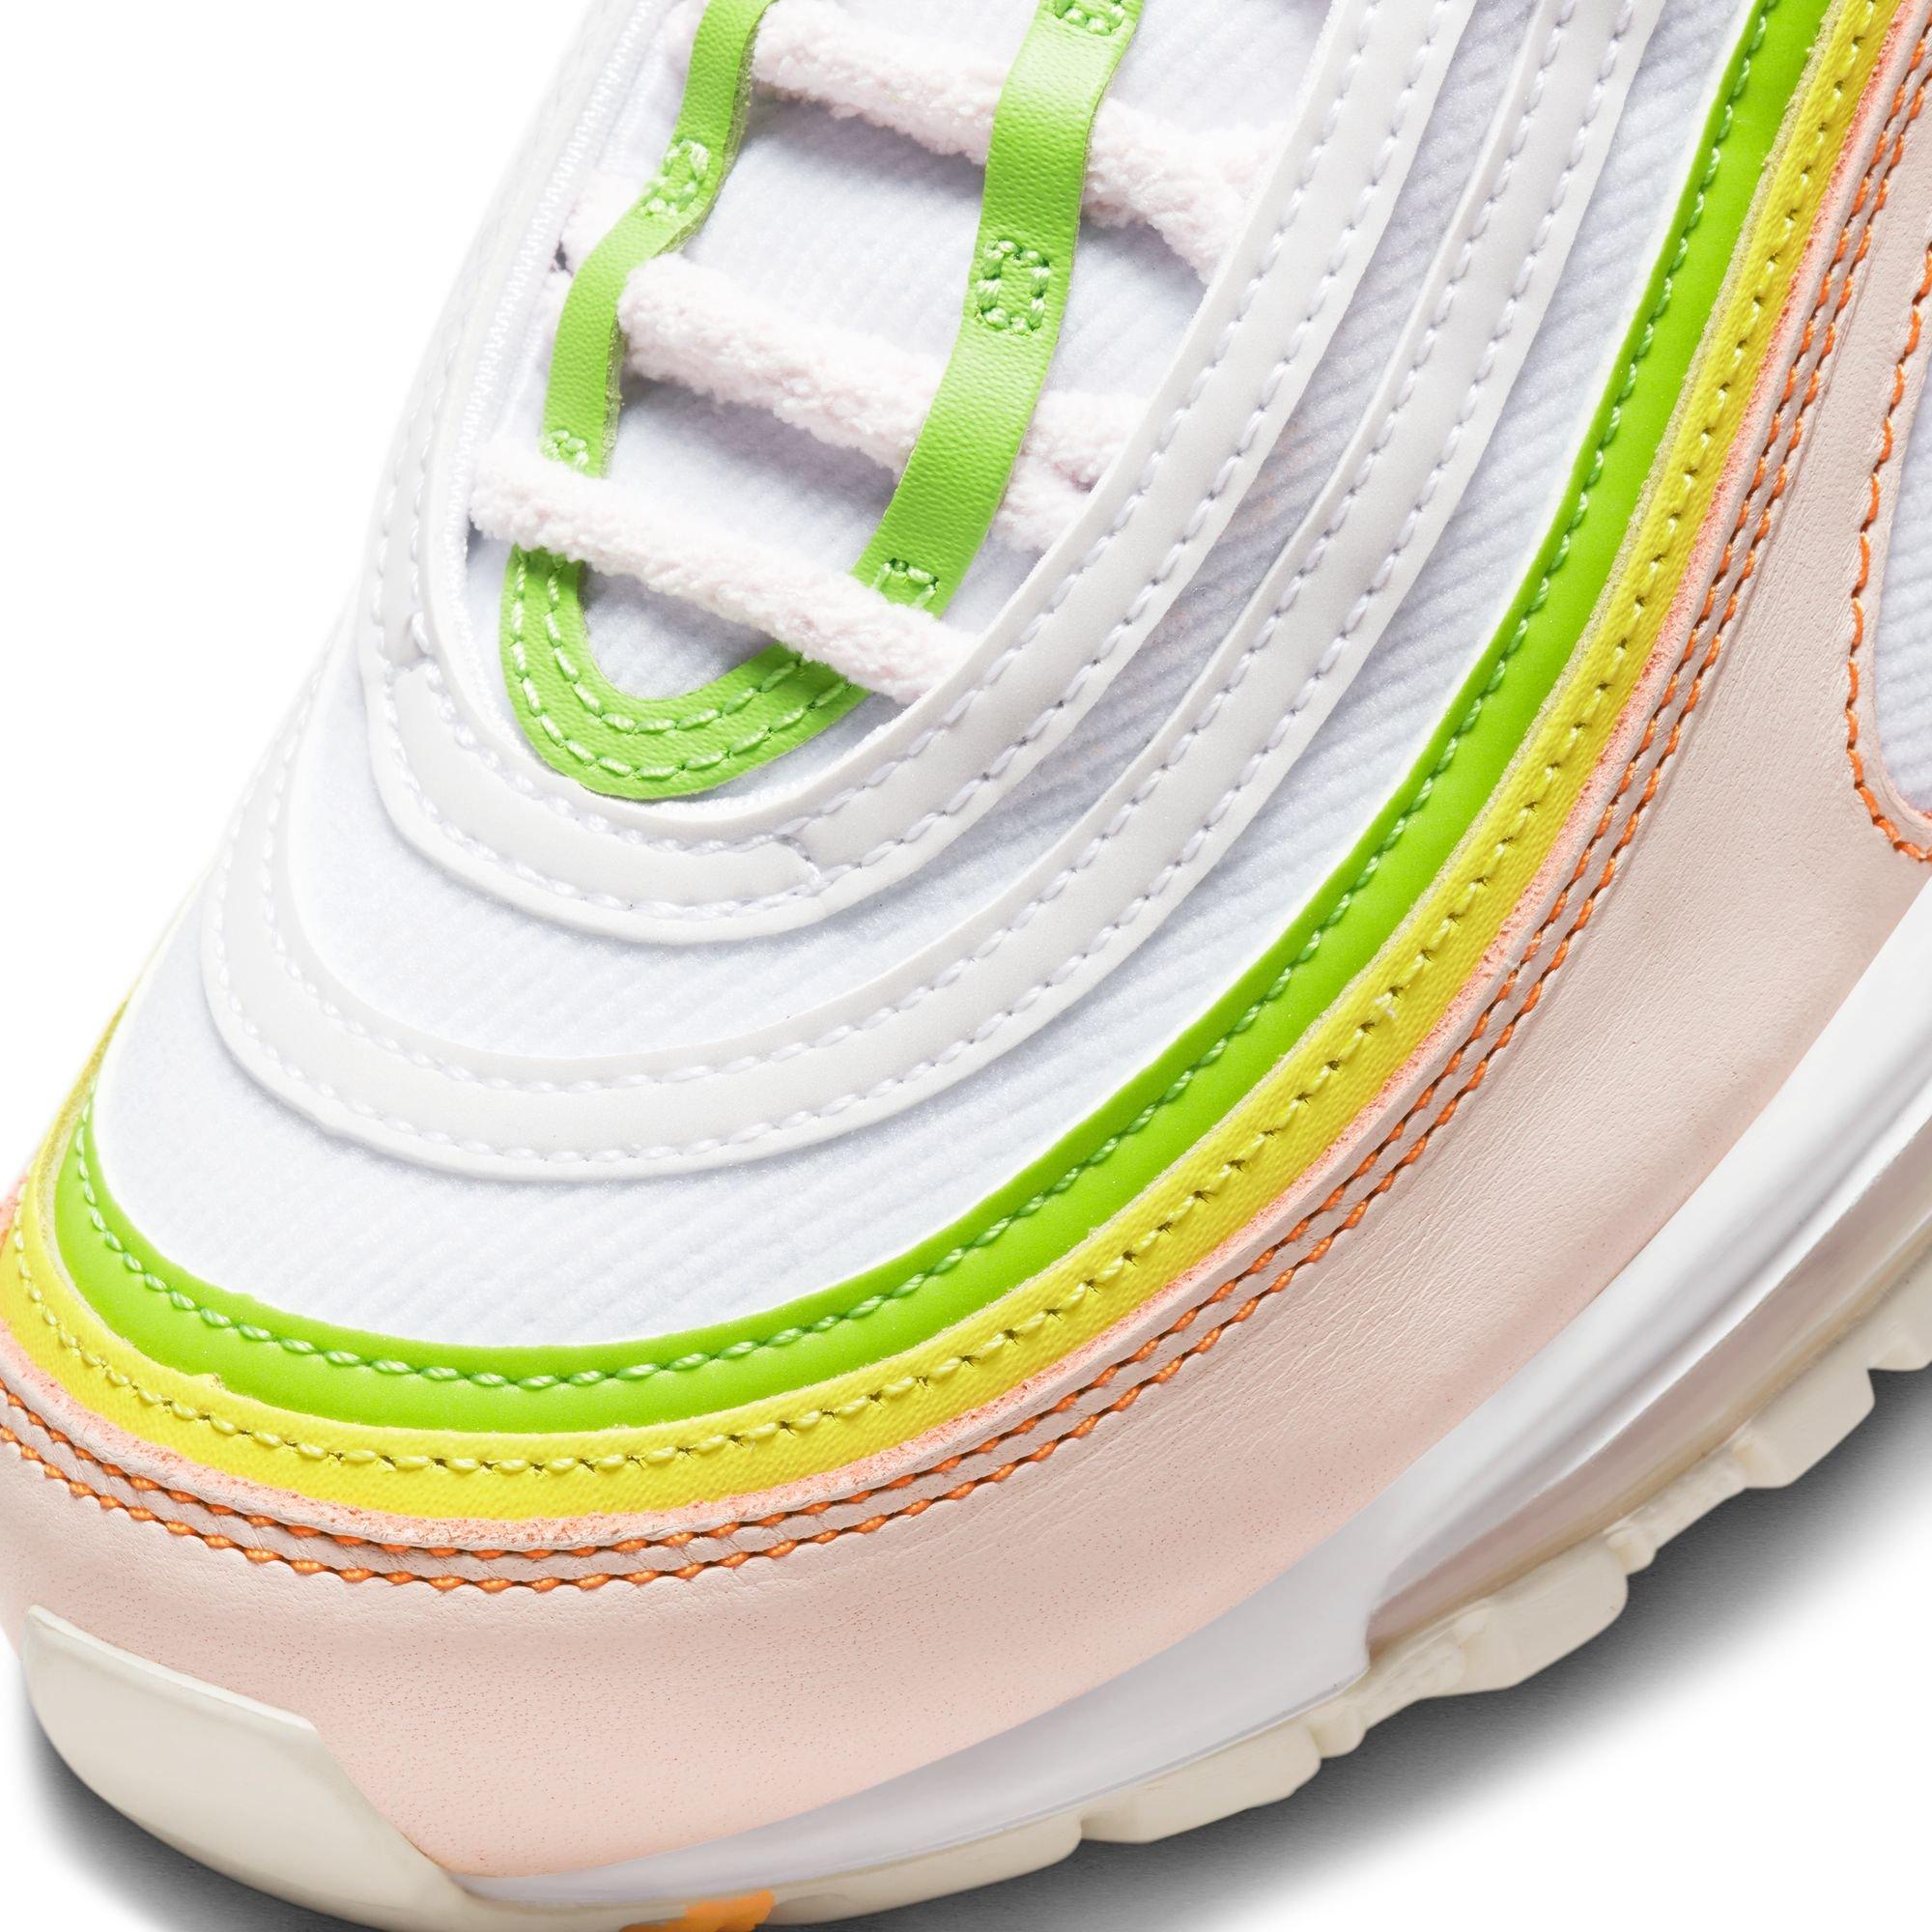 Nike Air Max "White/Pearl Pink/Action Women's